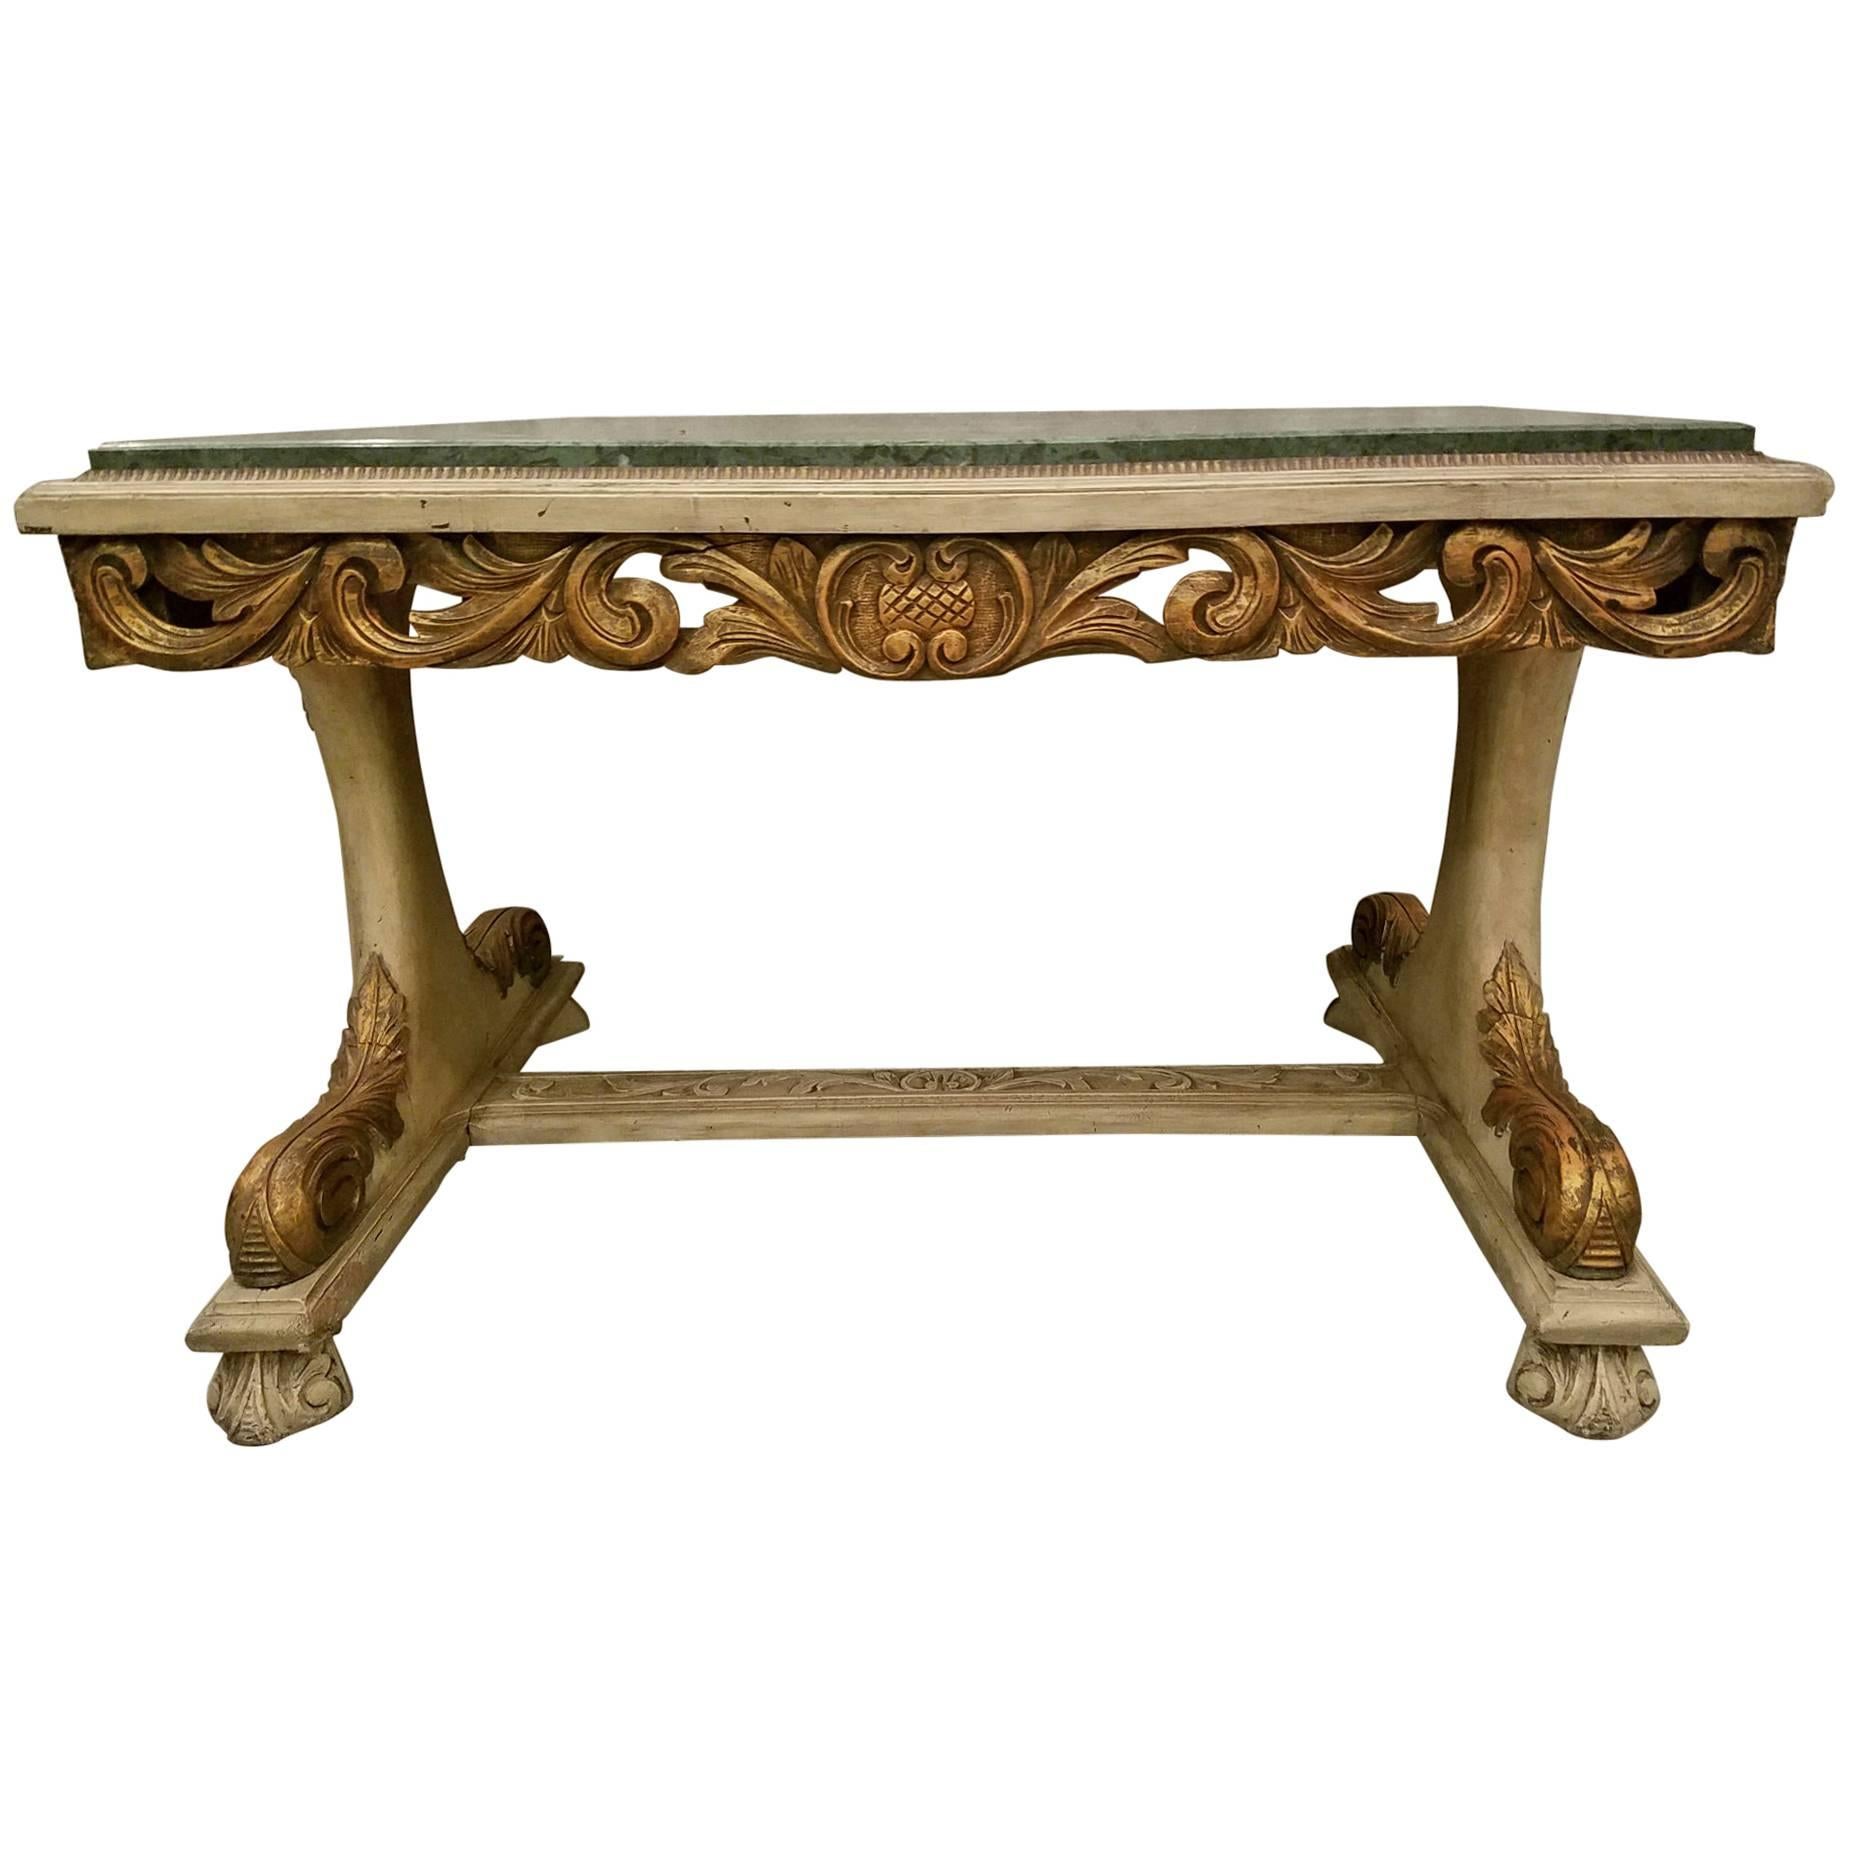 19th Century Italian Marble-Top Center Table For Sale